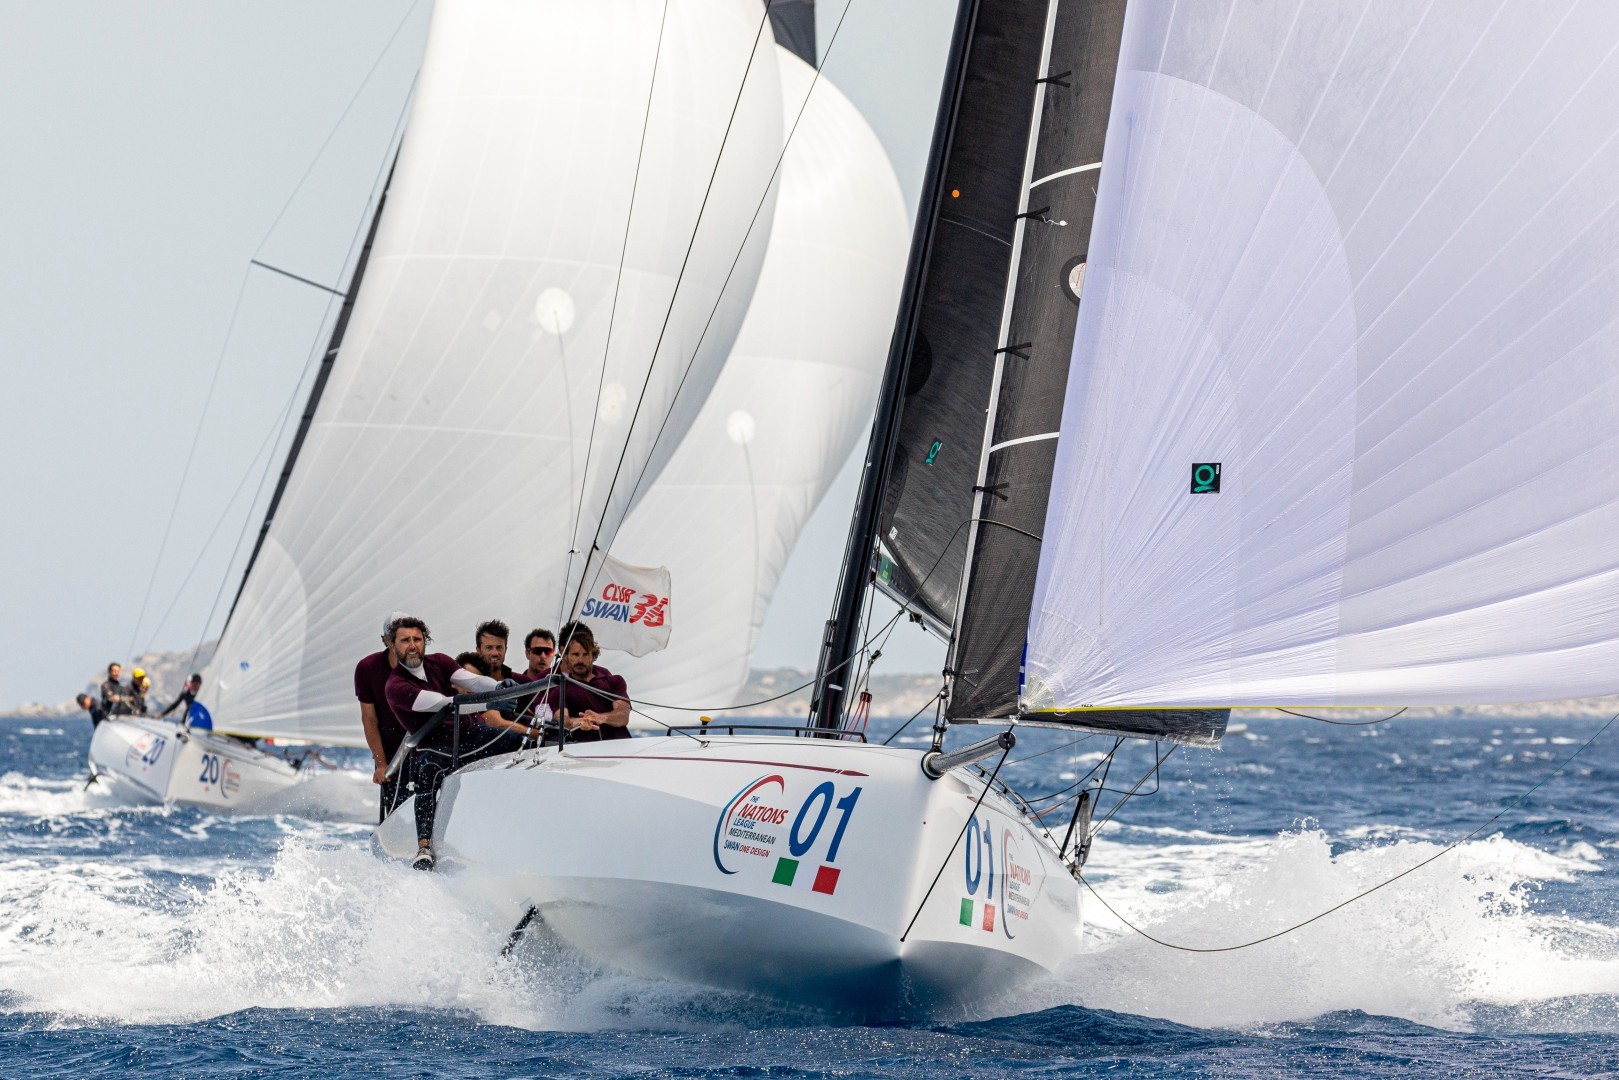 Largest ever gathering of ClubSwan 36s for first ever European Championship